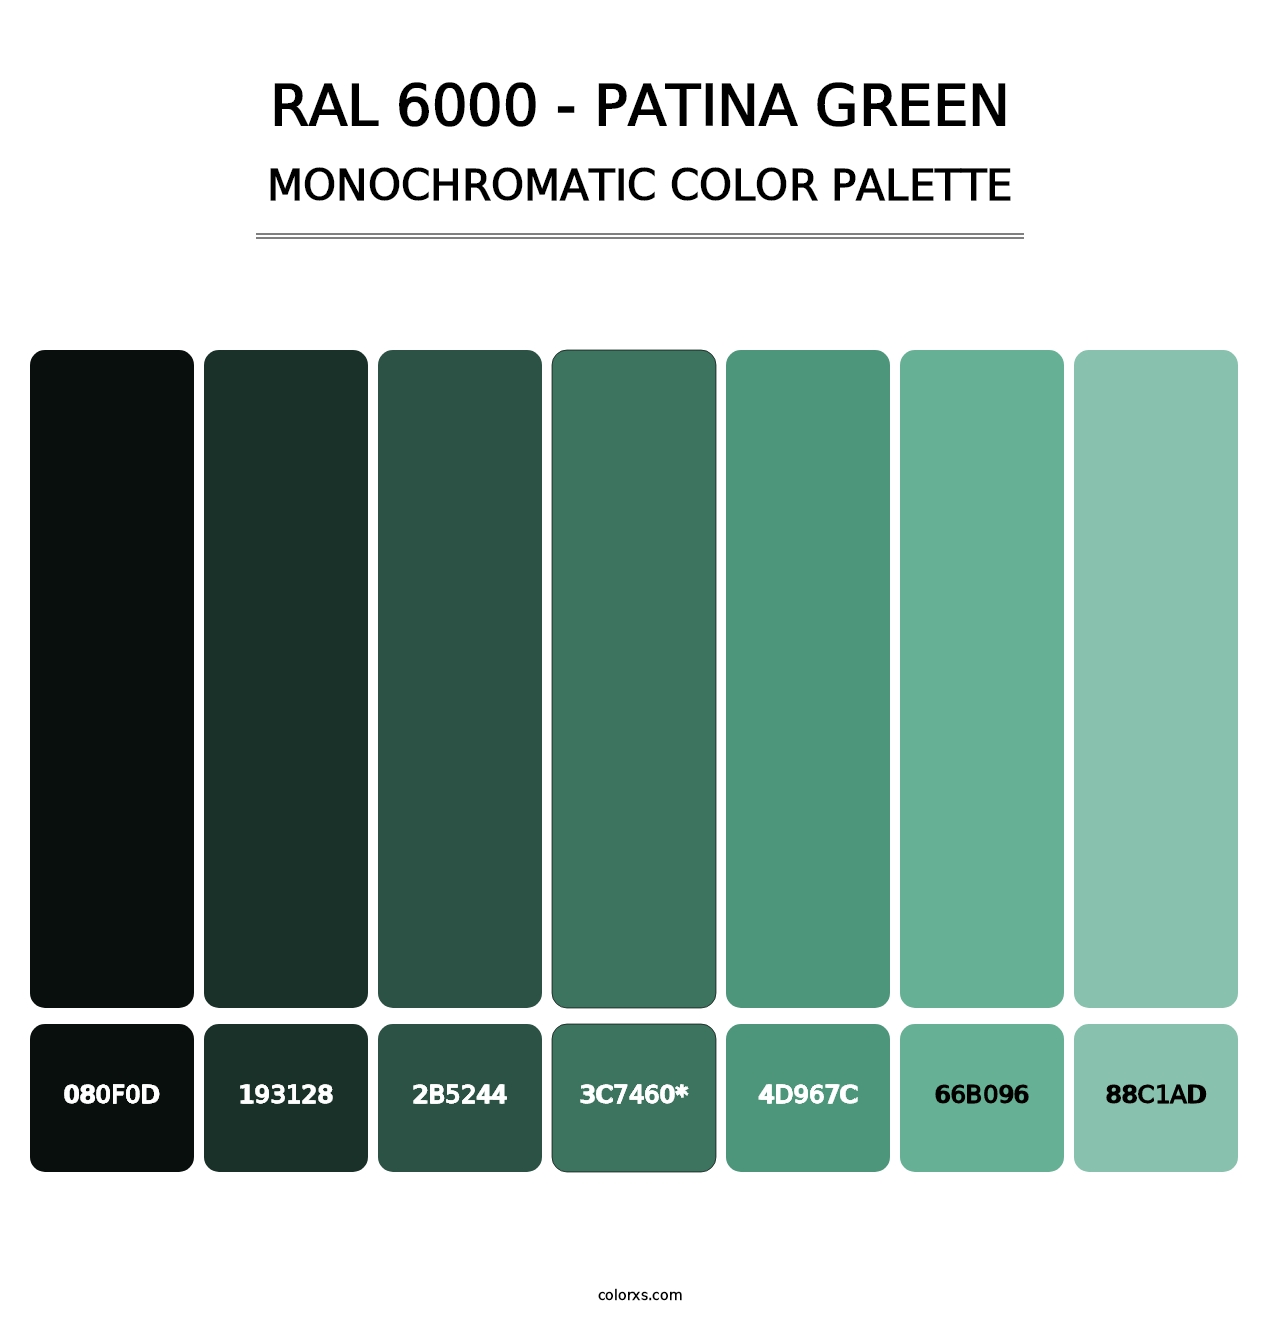 RAL 6000 - Patina Green - Monochromatic Color Palette